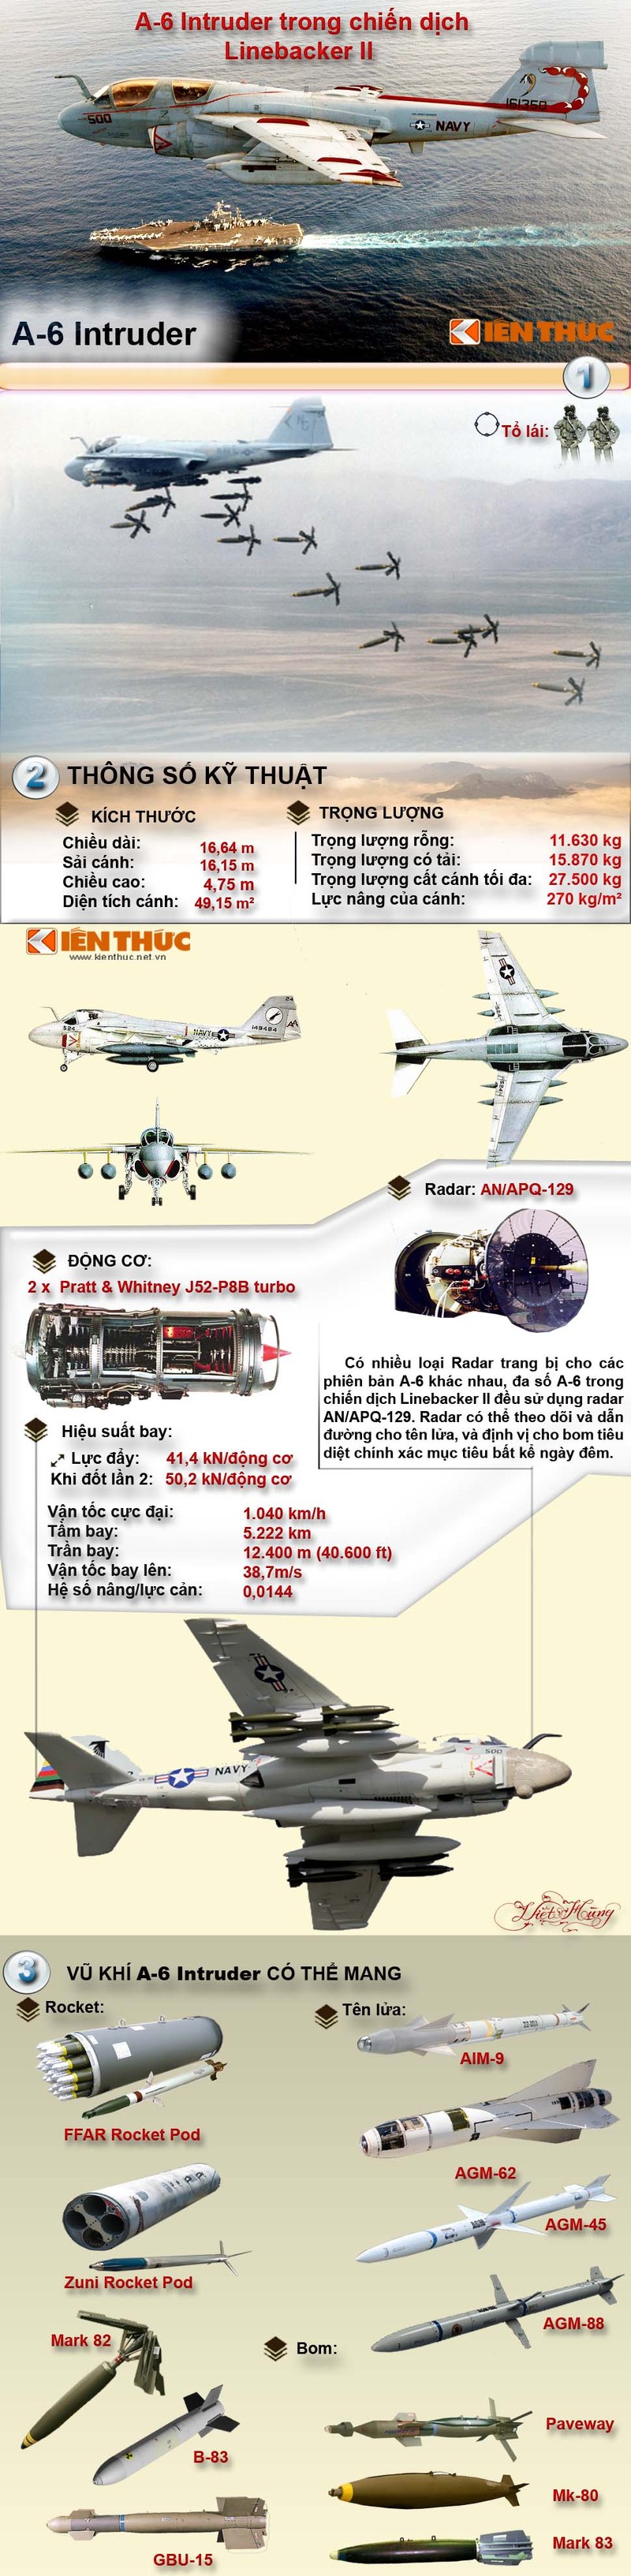 Infographic: May bay My trong chien dich Linebacker II nam 1972 (2)